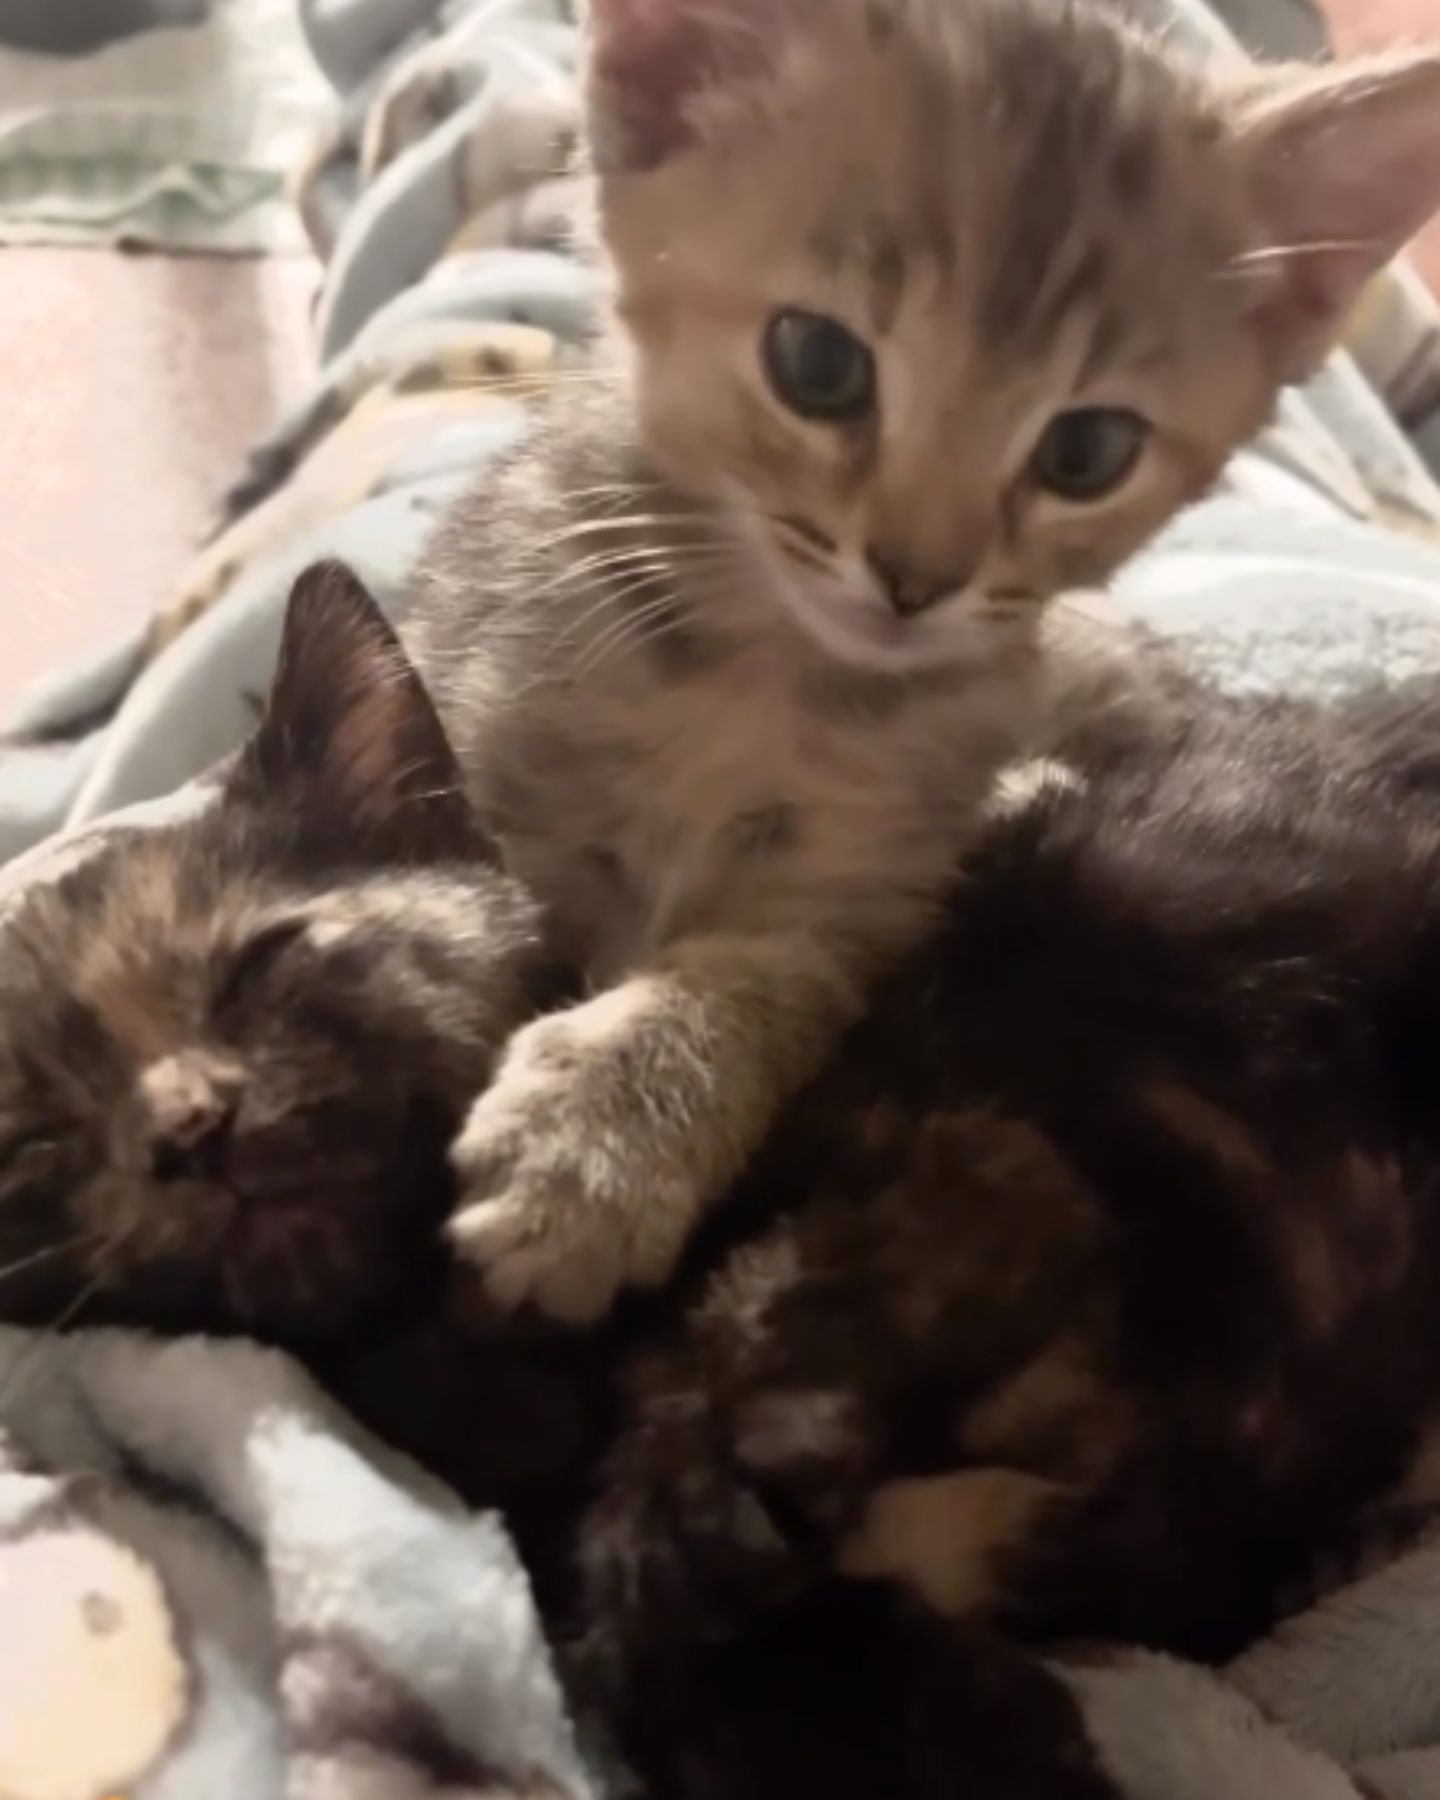 two kittens playing together